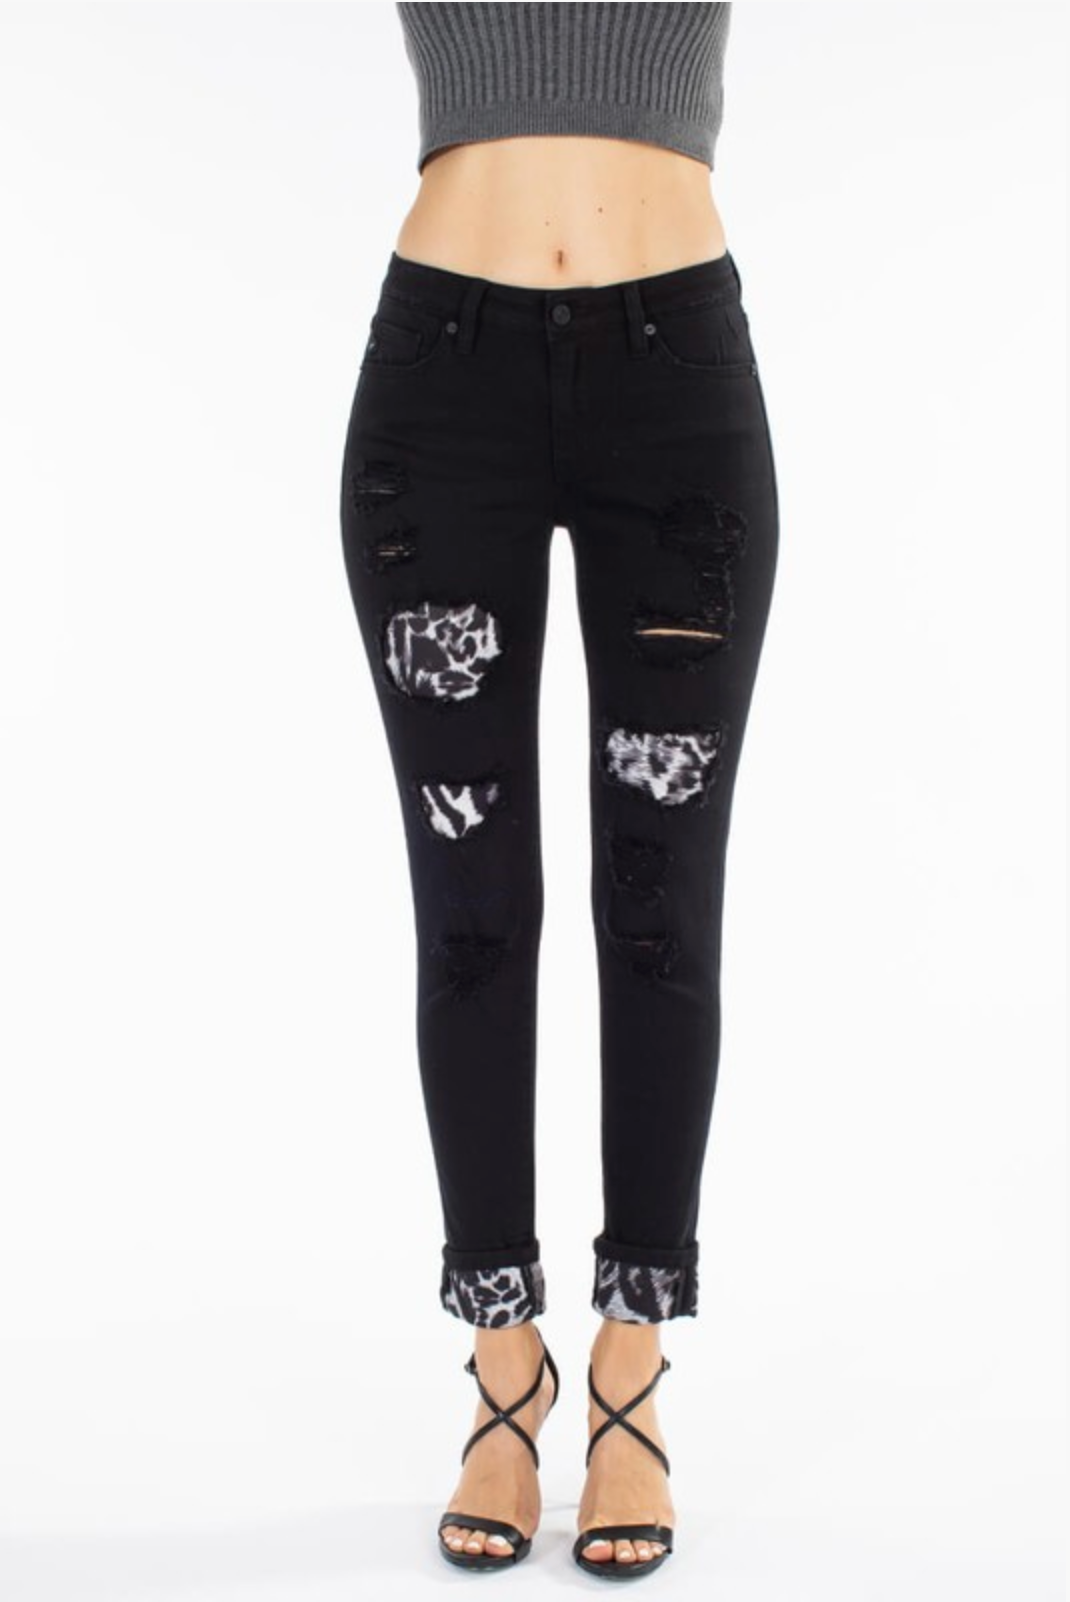 KanCan Rebel With a Cause Snow Leopard Patch Kan Can Skinnies Boutique Simplified